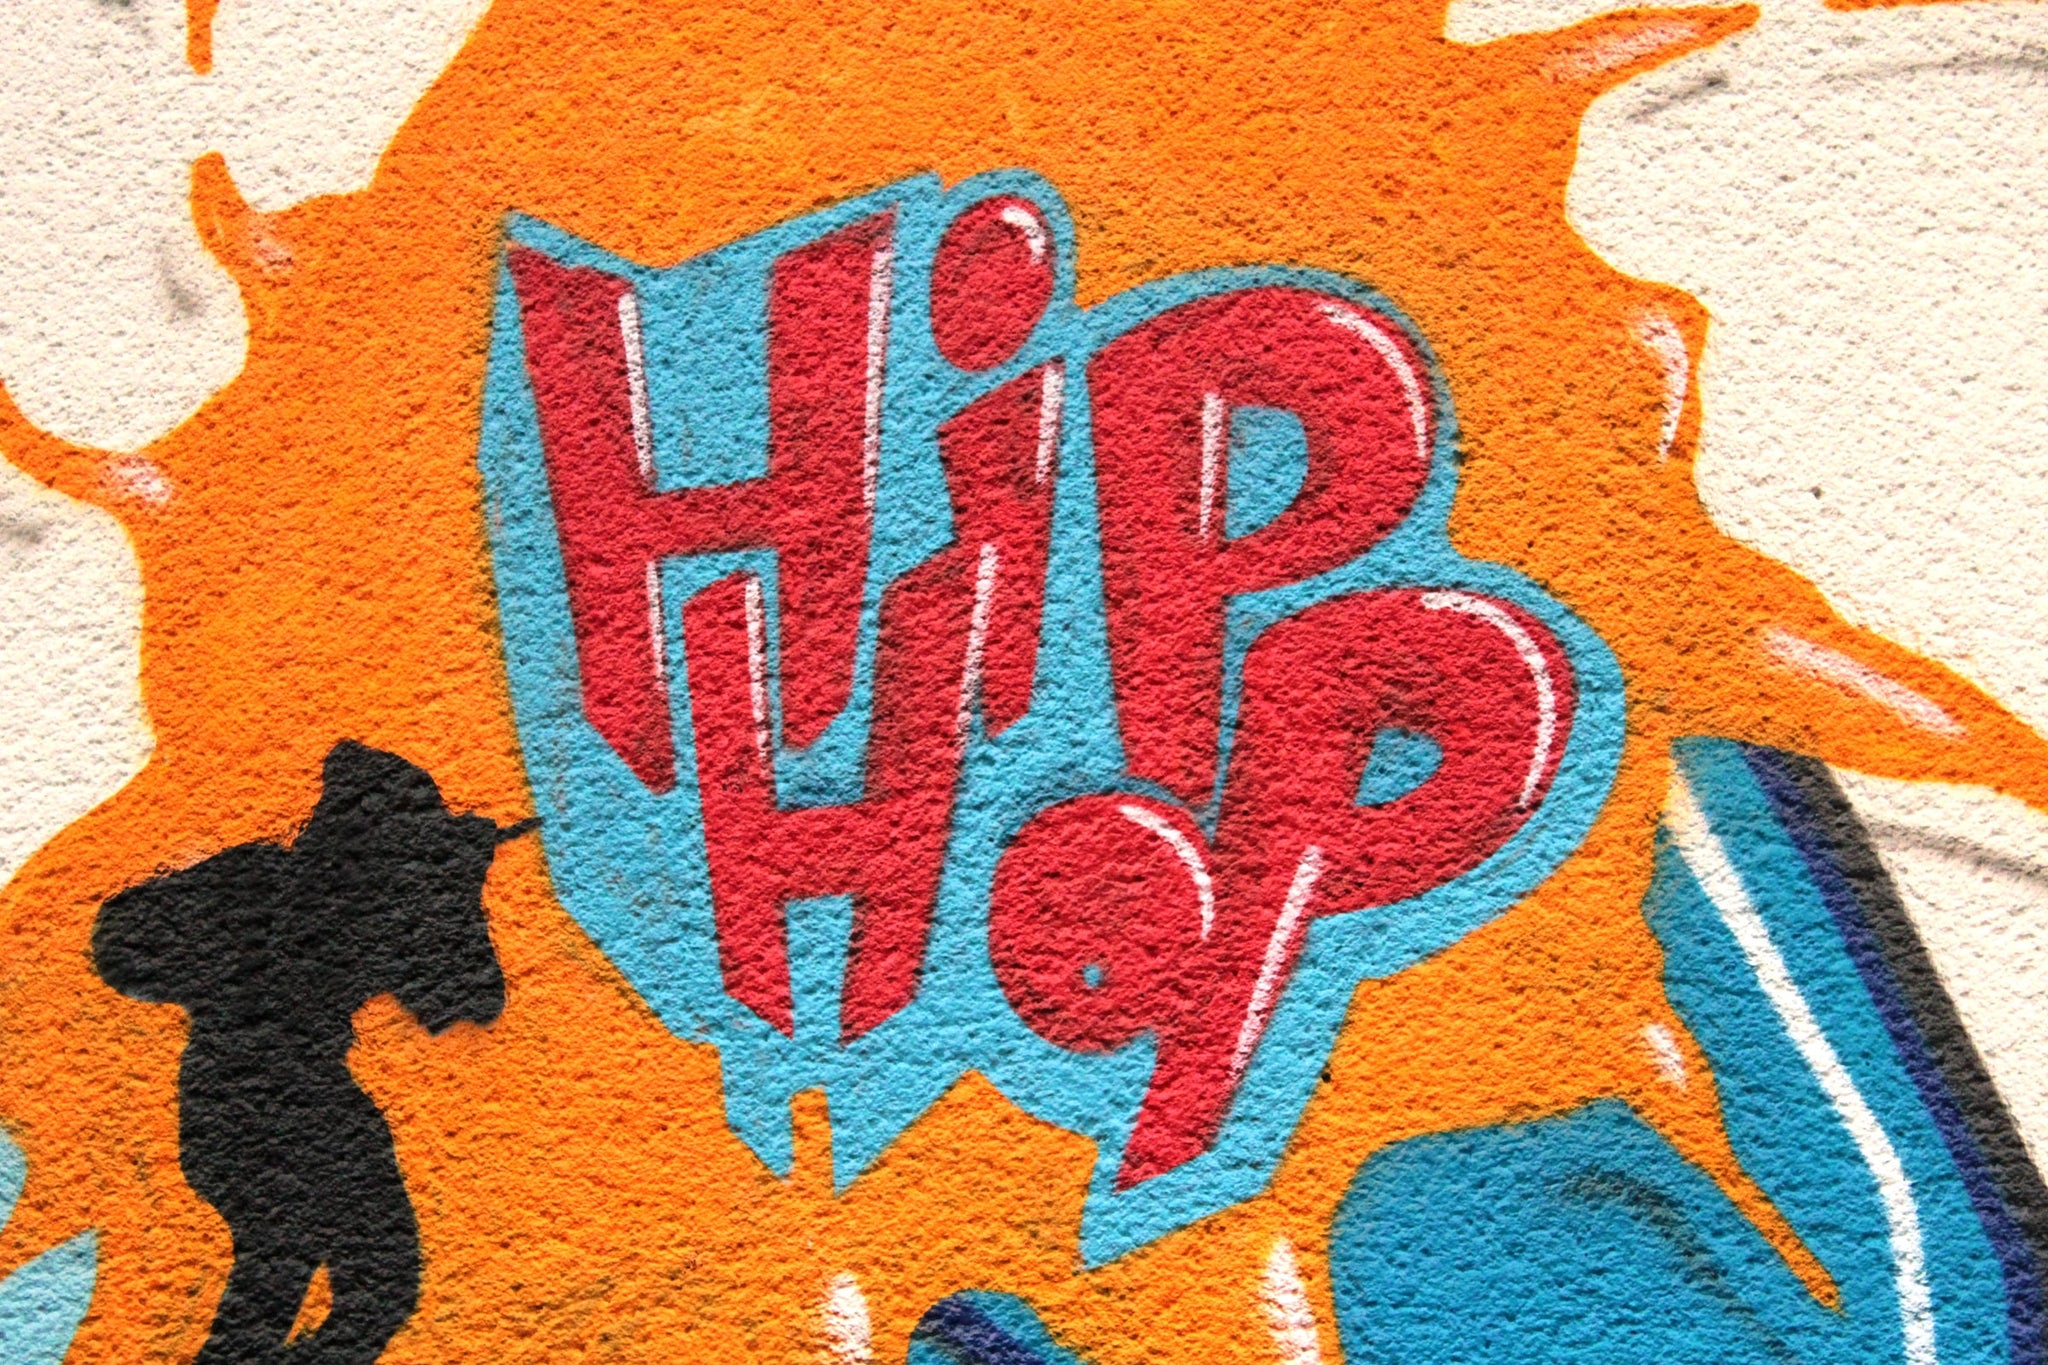 Mastering for Hip Hop and Rap Music: Creating a Big and Punchy Sound